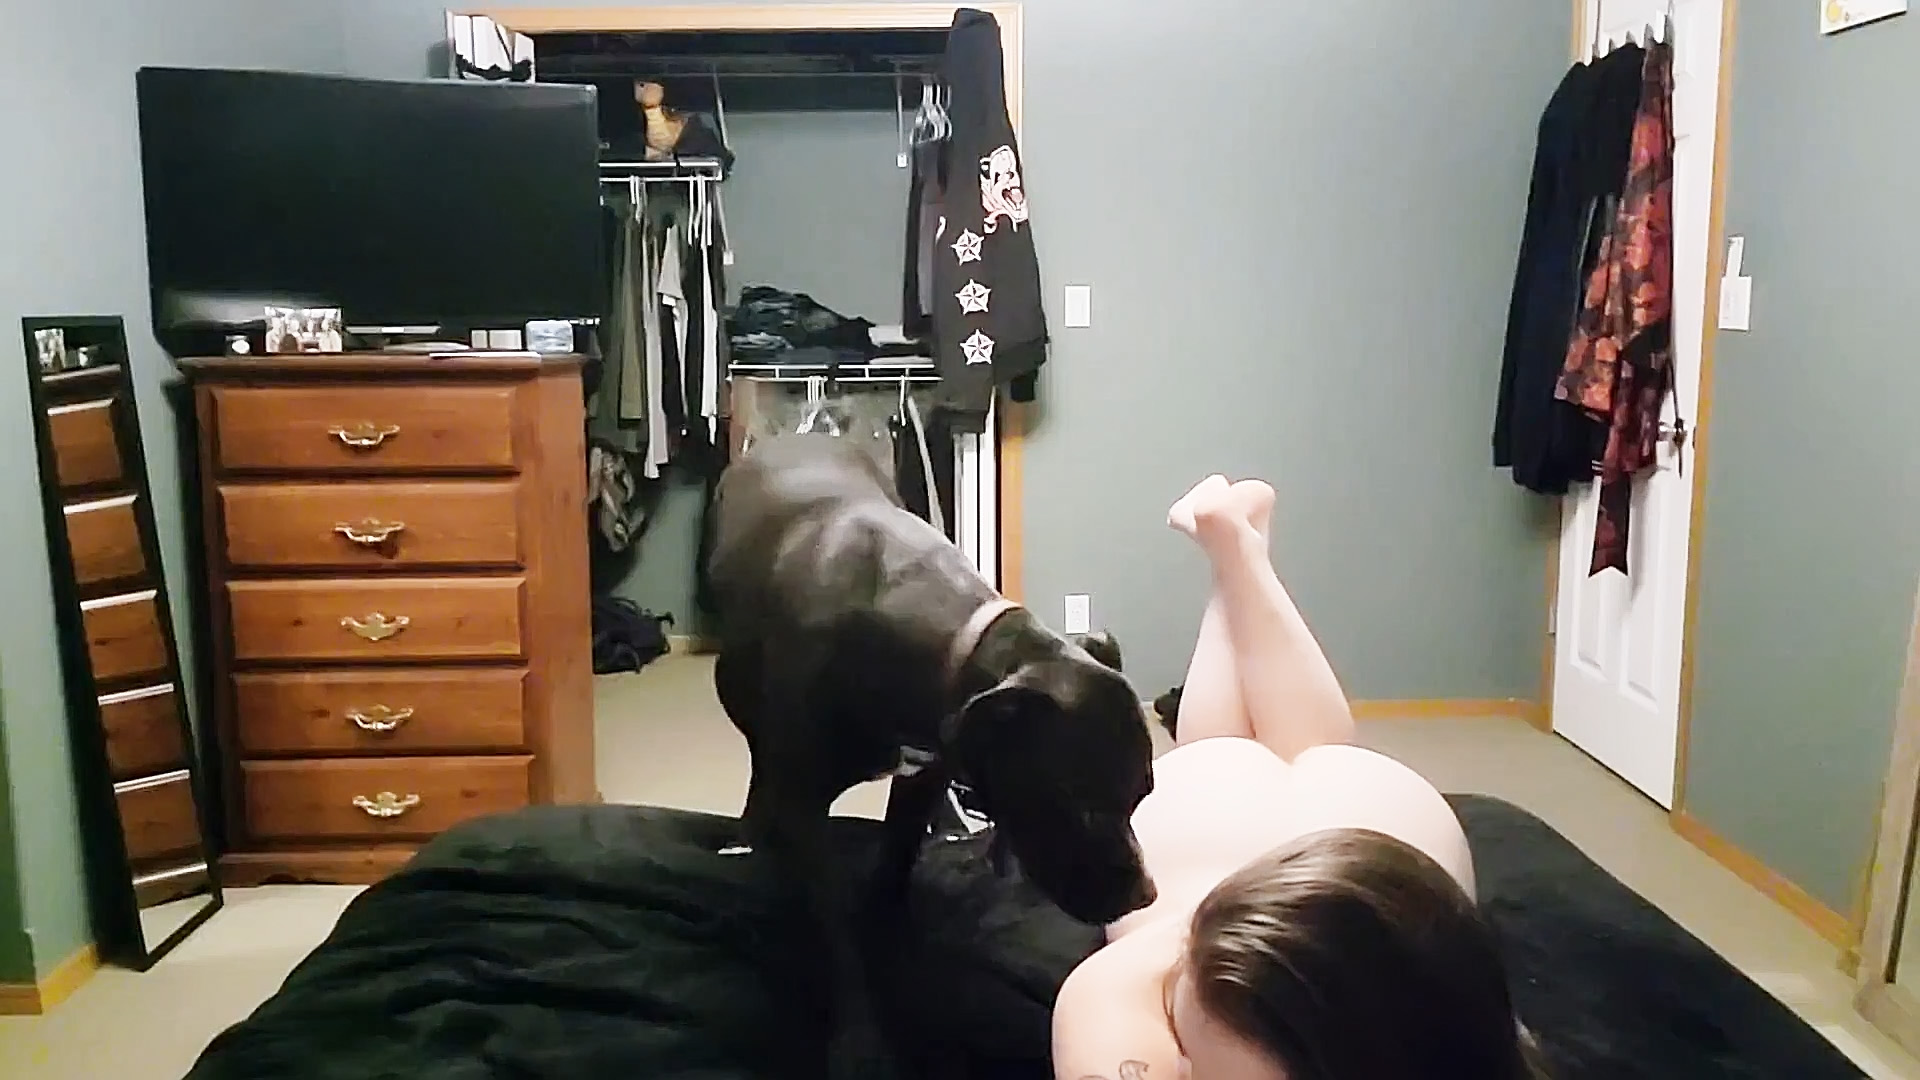 Full nude girl dancing with her dog for the hidden camera | AREA51.PORN